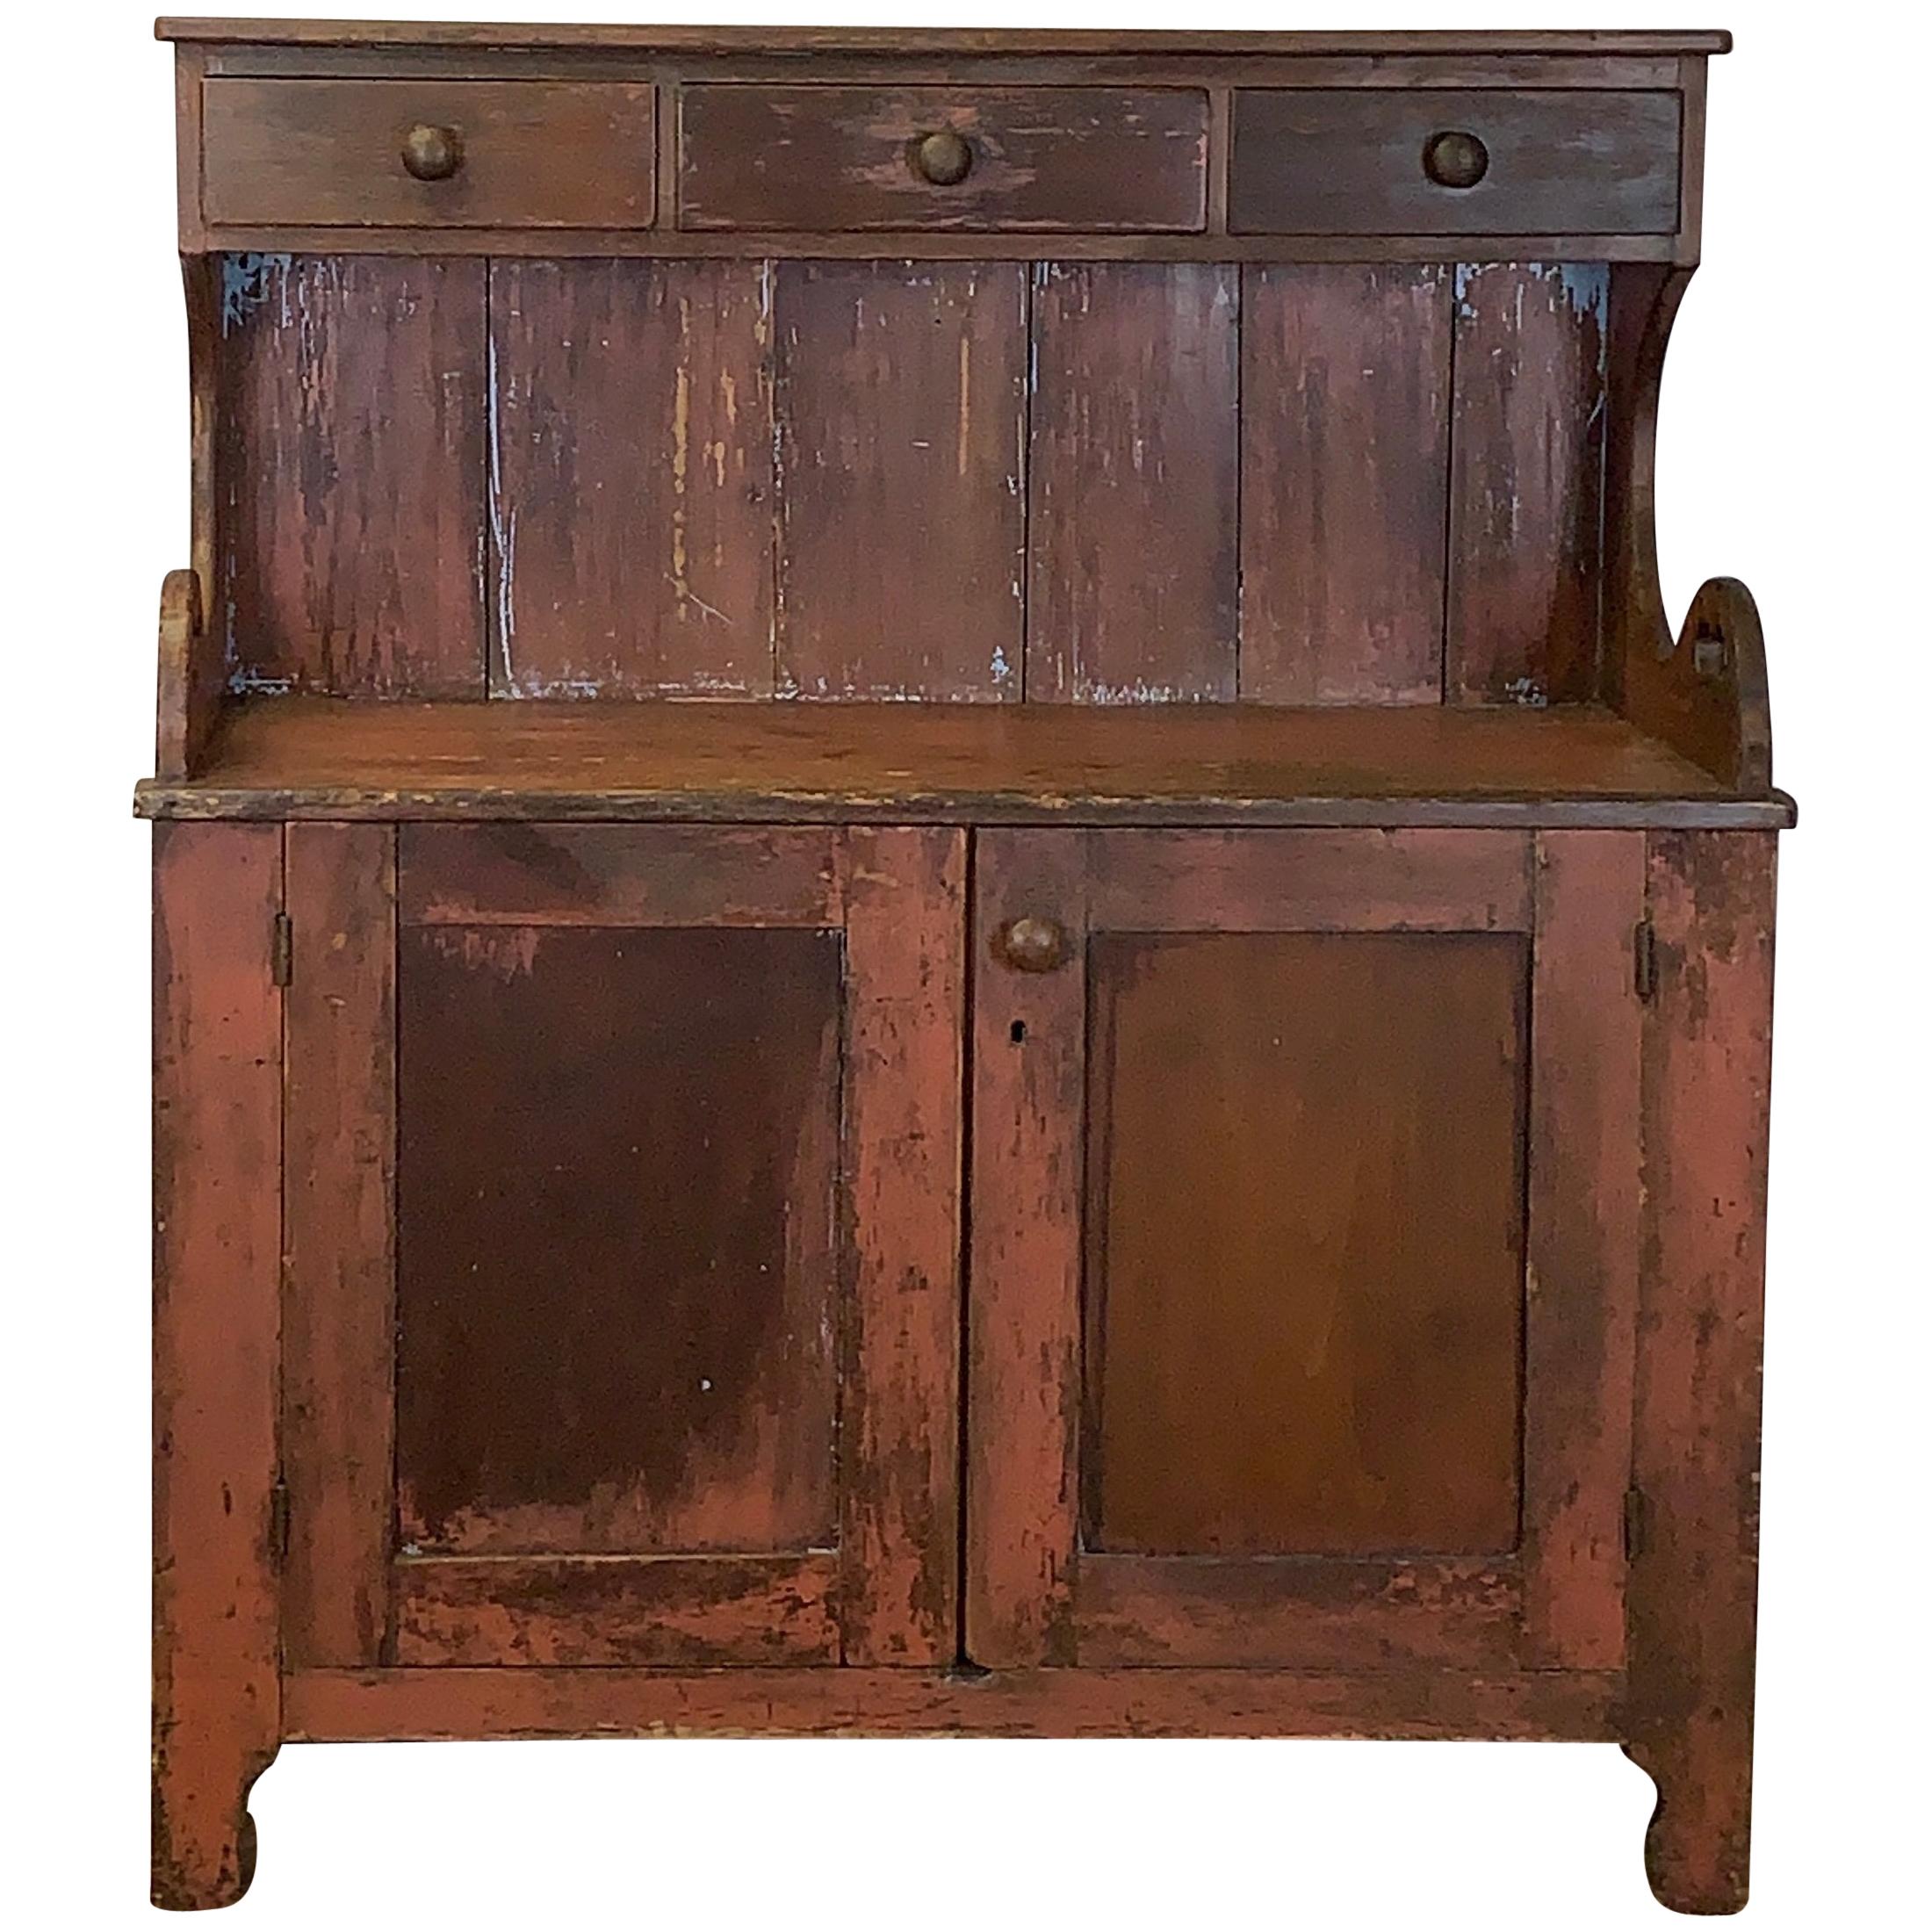 19th Century American Primitive Dry Sink or Cabinet